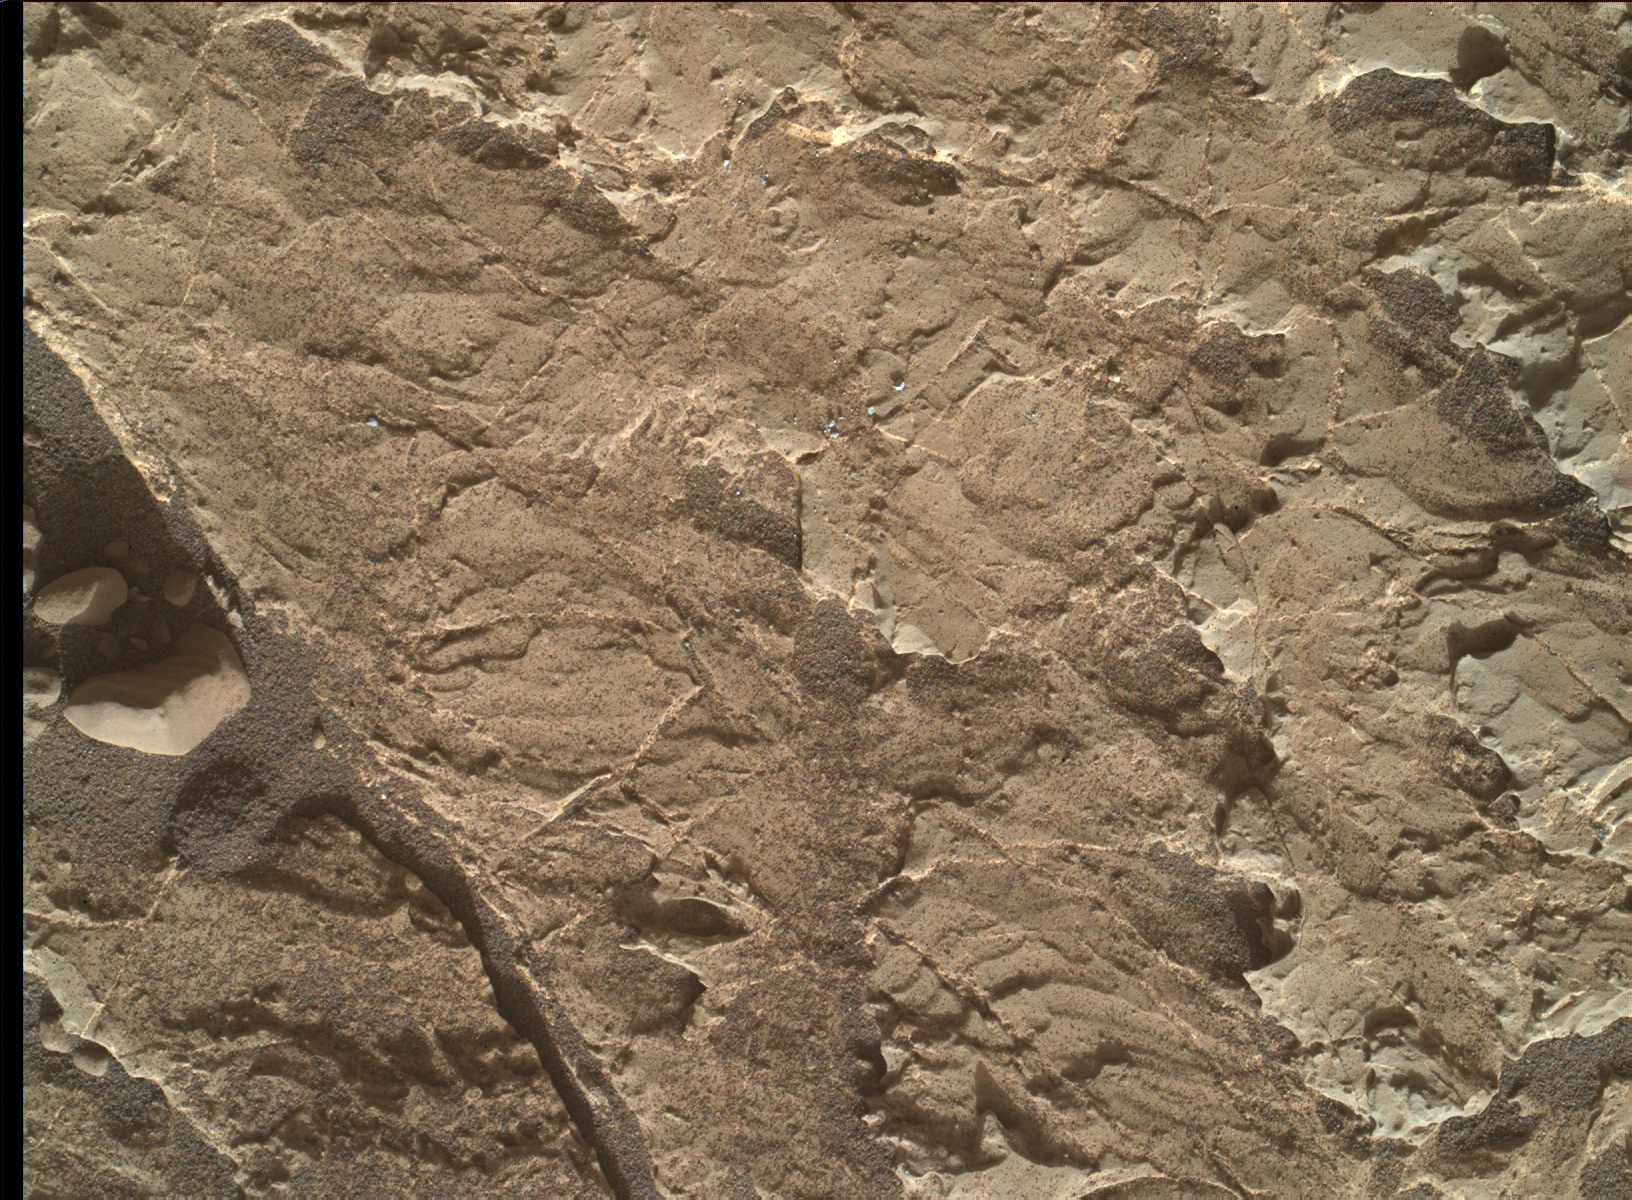 Nasa's Mars rover Curiosity acquired this image using its Mars Hand Lens Imager (MAHLI) on Sol 1979